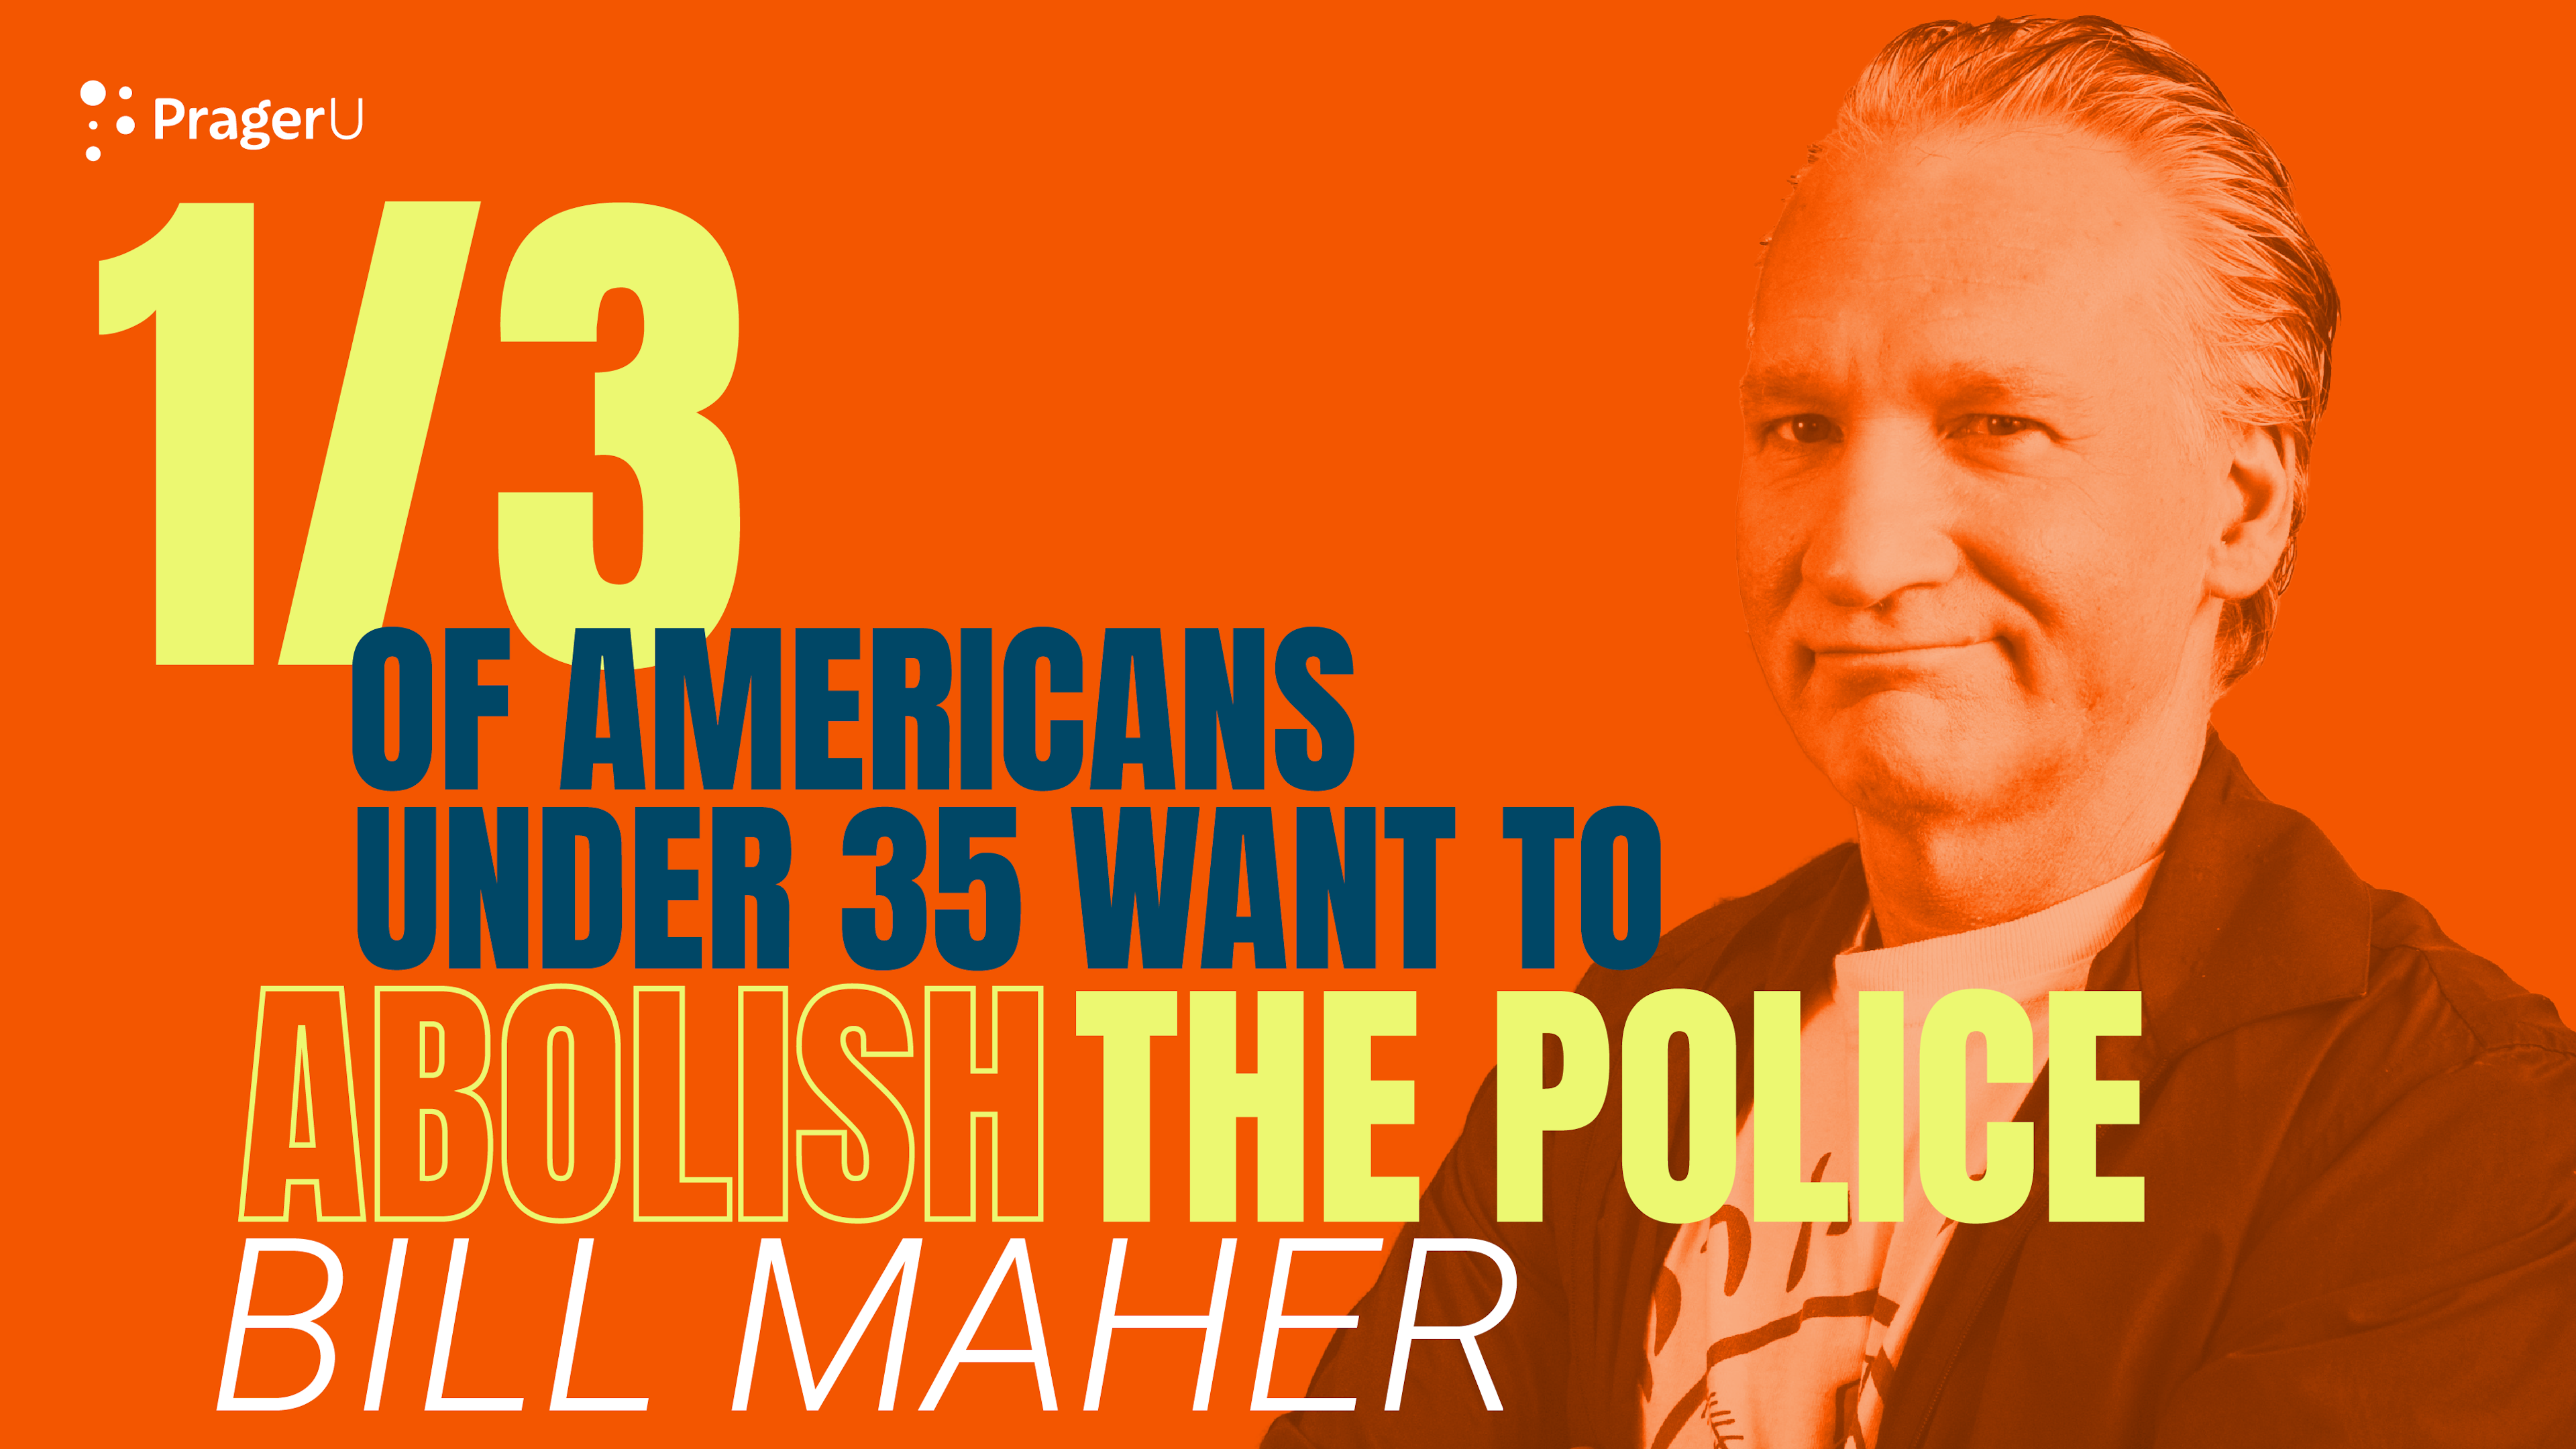 A Third of Americans under 35 Want to Abolish the Police